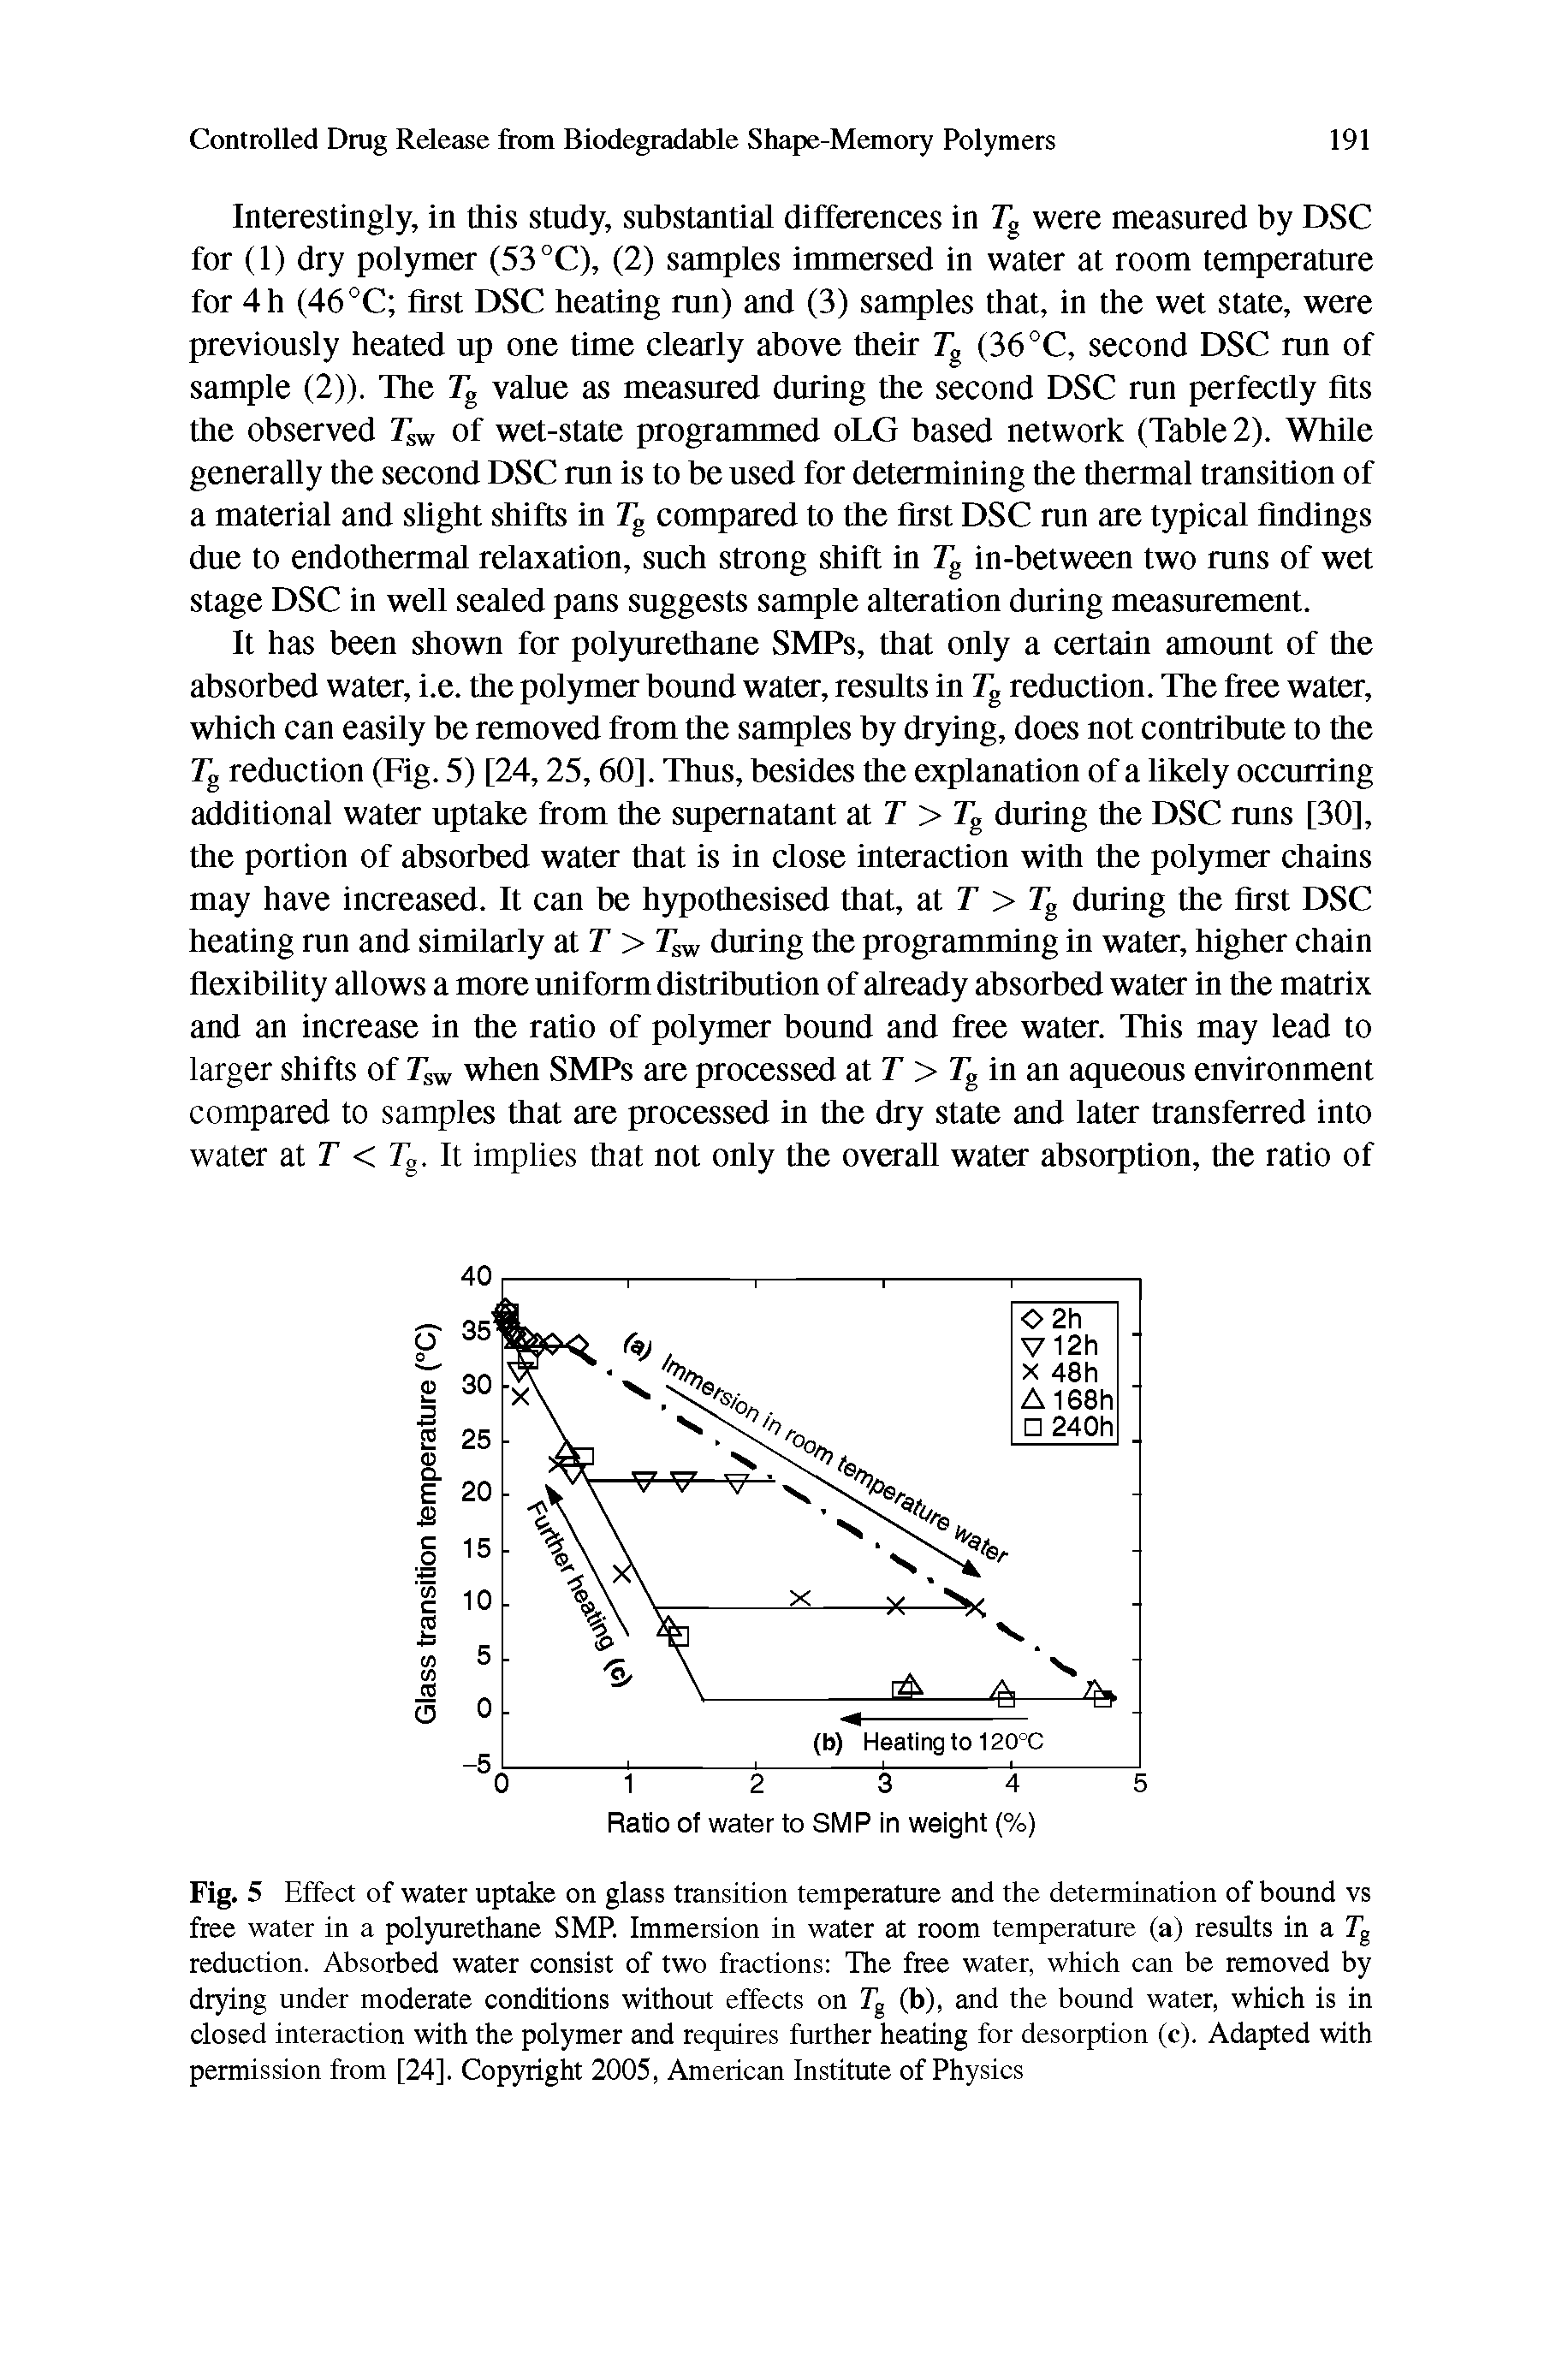 Fig. 5 Effect of water uptake on glass transition temperature and the determination of bound vs free water in a polyurethane SMP. Immersion in water at room temperature (a) results in a Tg reduction. Absorbed water consist of two fractions The free water, which can be removed by drying under moderate conditions without effects on Tg (b), and the bound water, which is in closed interaction with the polymer and requires further heating for desorption (c). Adapted with permission from [24], Copyright 2005, American Institute of Physics...